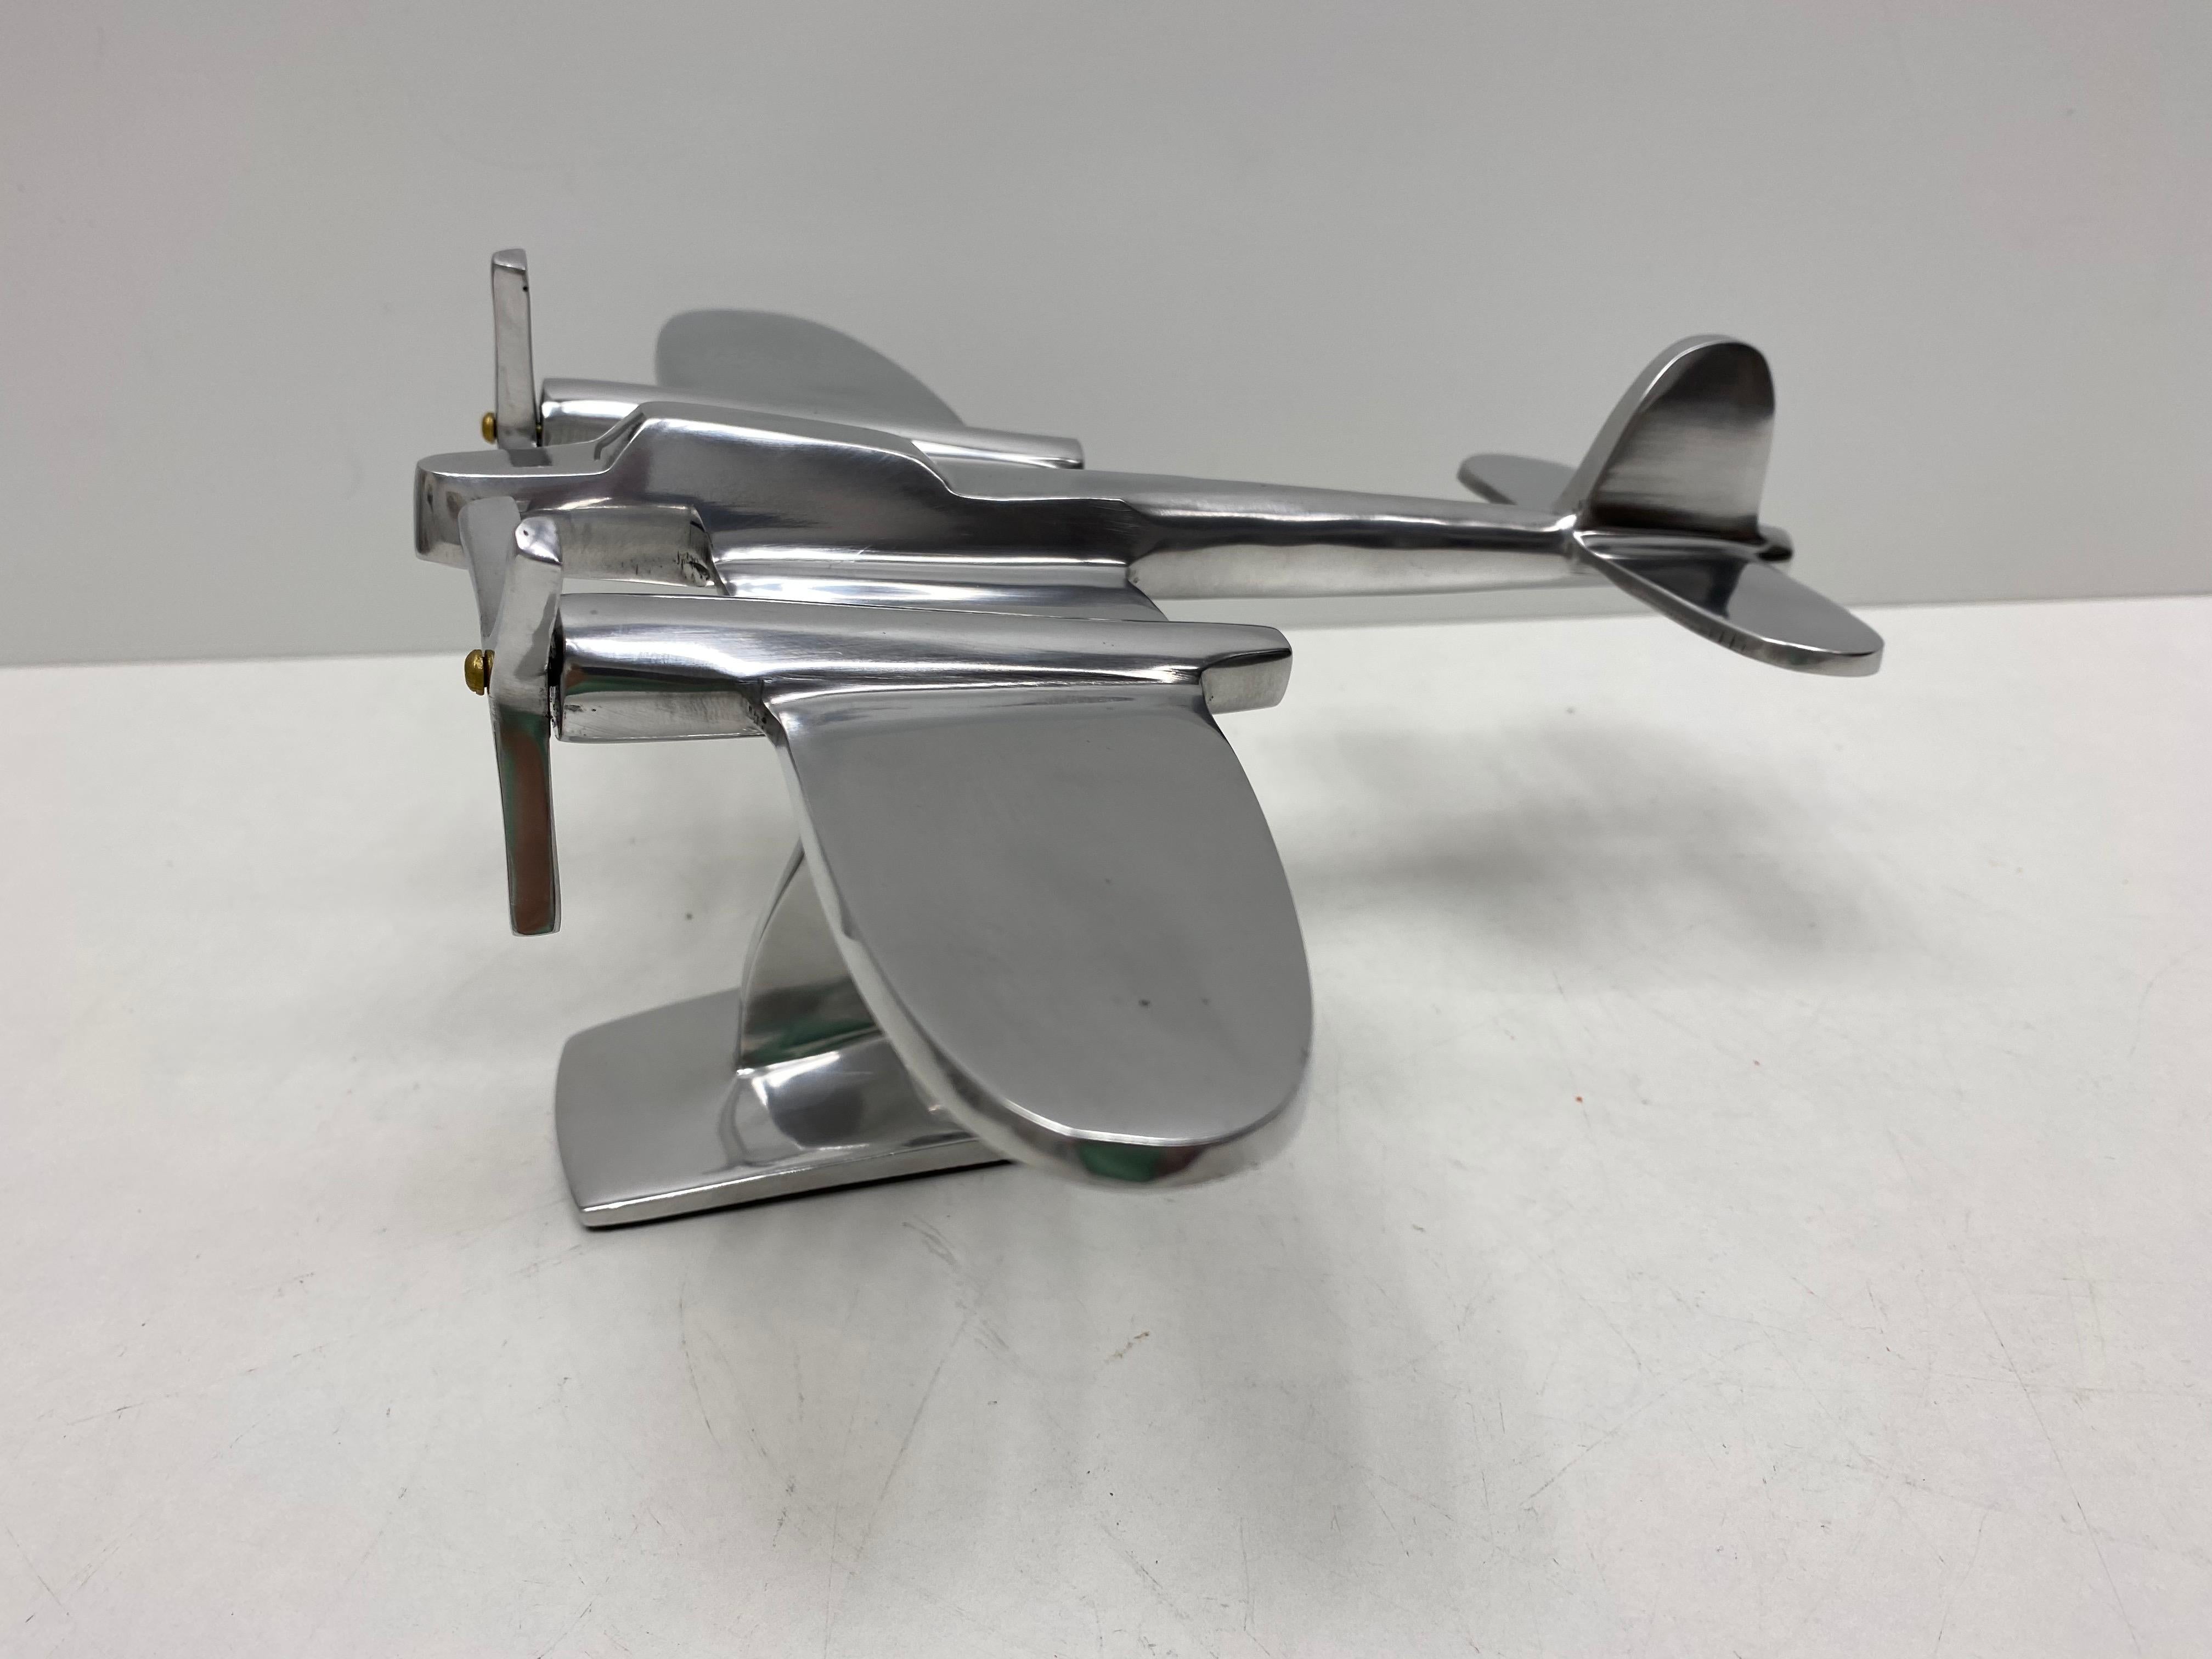 A Industrial plane model made in the 1980s. This unique object is made of metal, probably aluminum. A nice Industrial sculpture for displaying them on a cupboard, credenza or a desk.